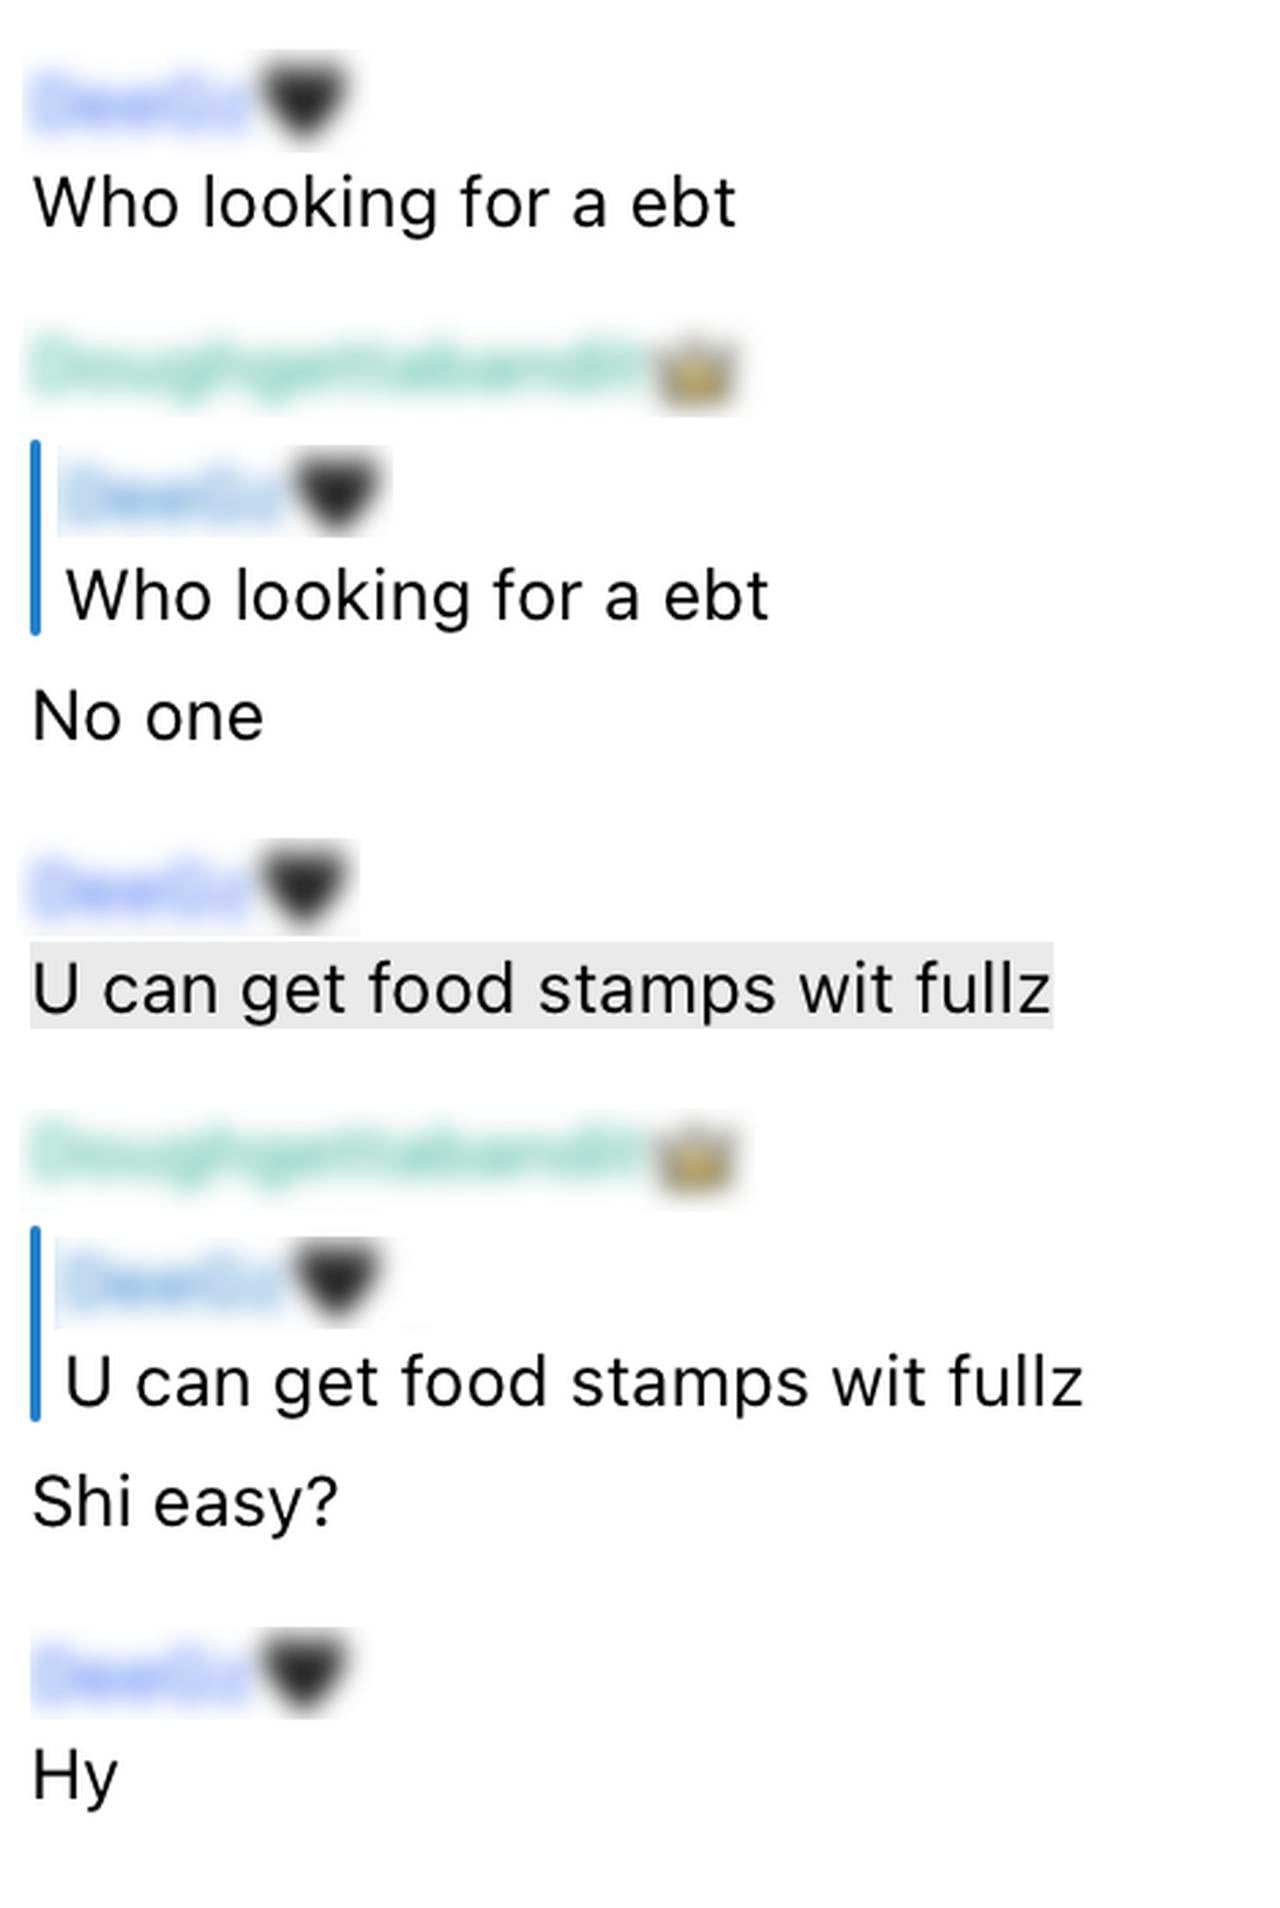 EBT cards losing millions per month to organized crime